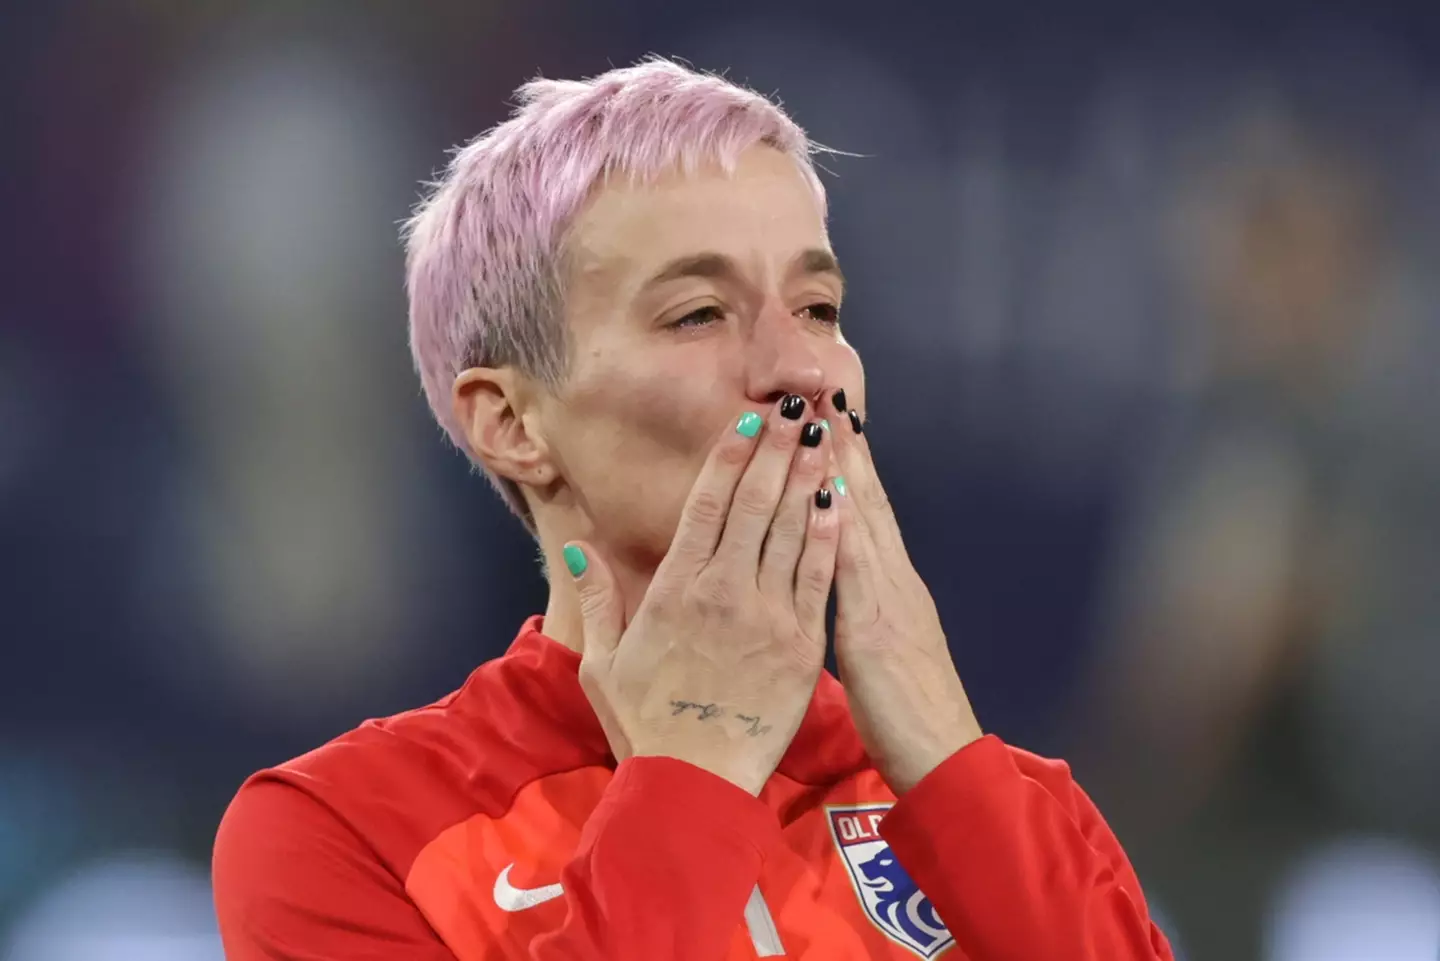 Rapinoe blowing a kiss to supporters. (Image